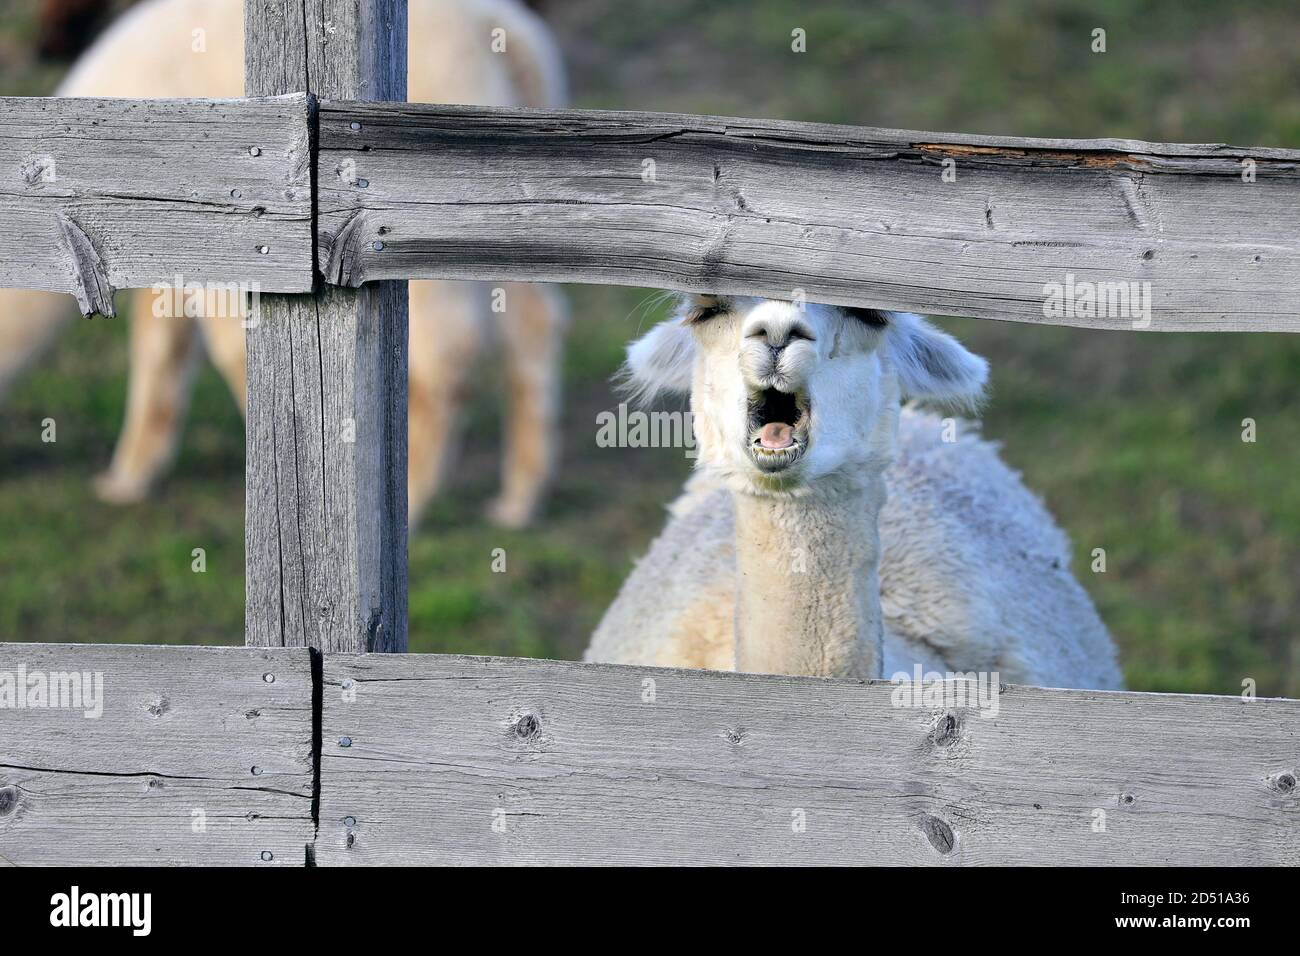 Sleepy white Alpaca, Vicugna pacos, is looking through wooden fence and yawning. Funny animal photo. Stock Photo